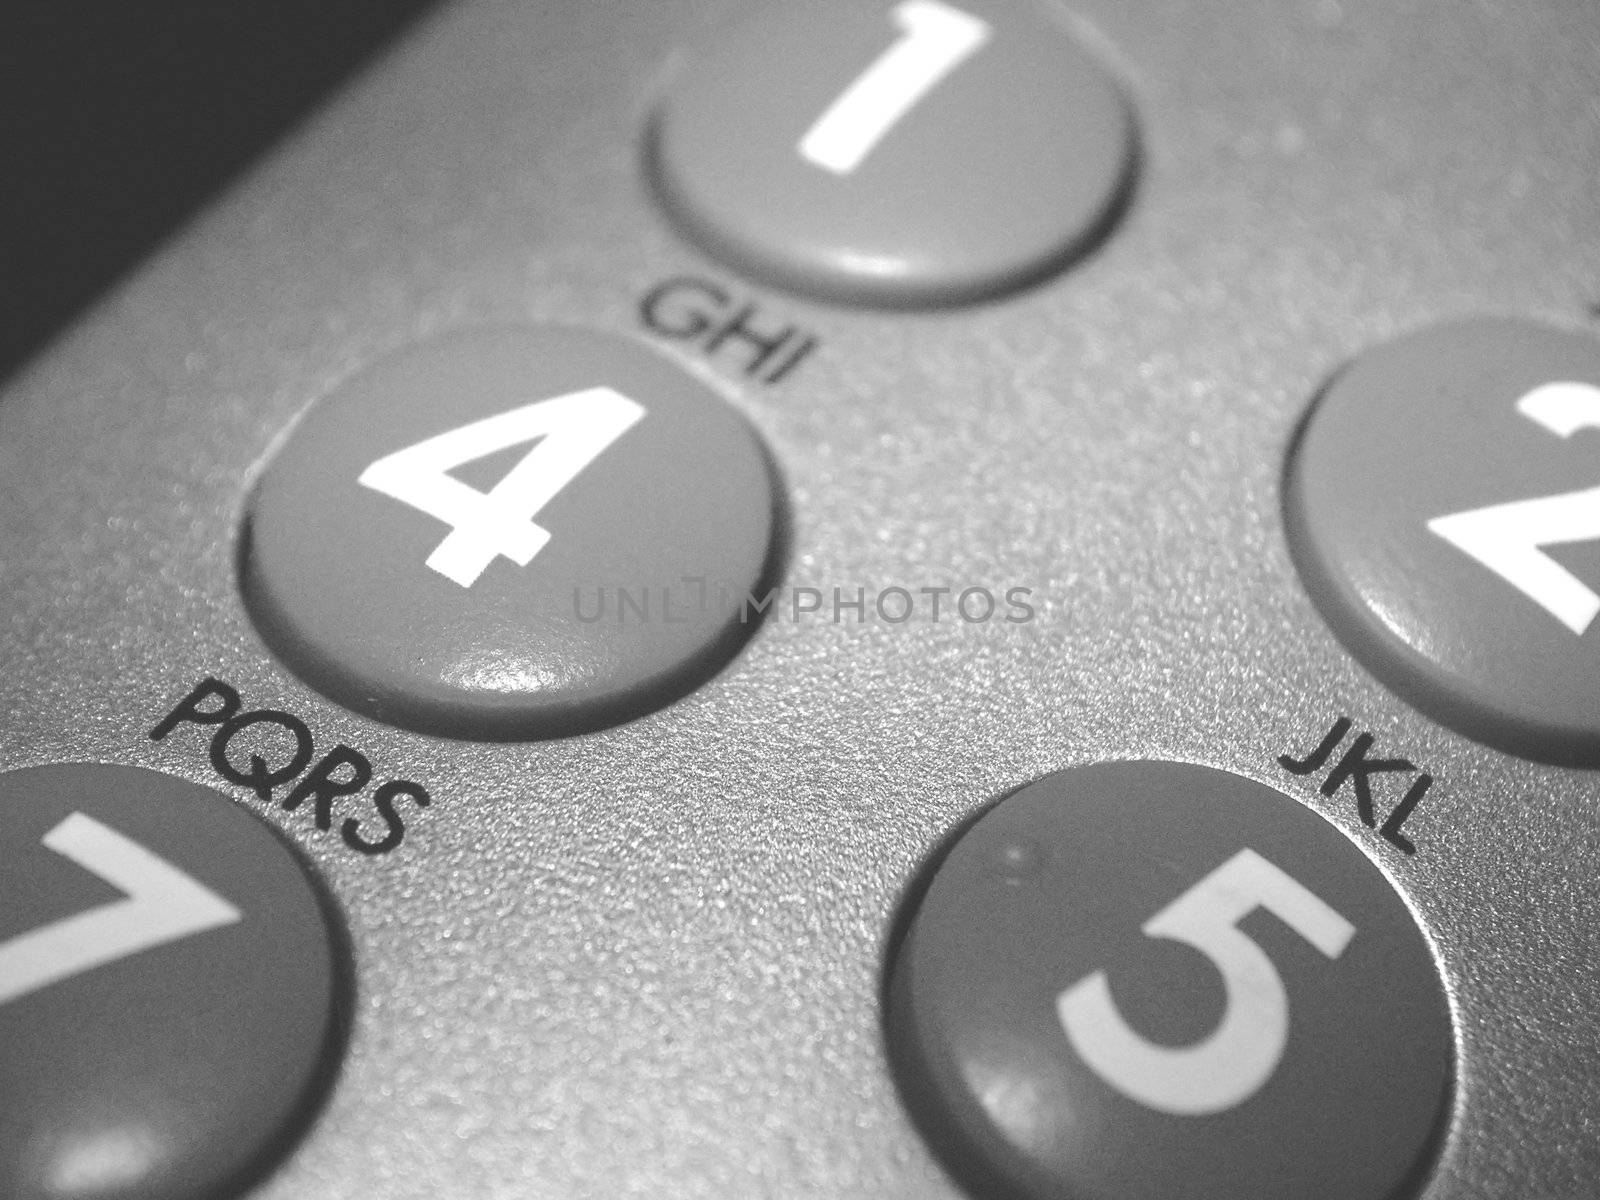 details of the buttons of a hands free telephone